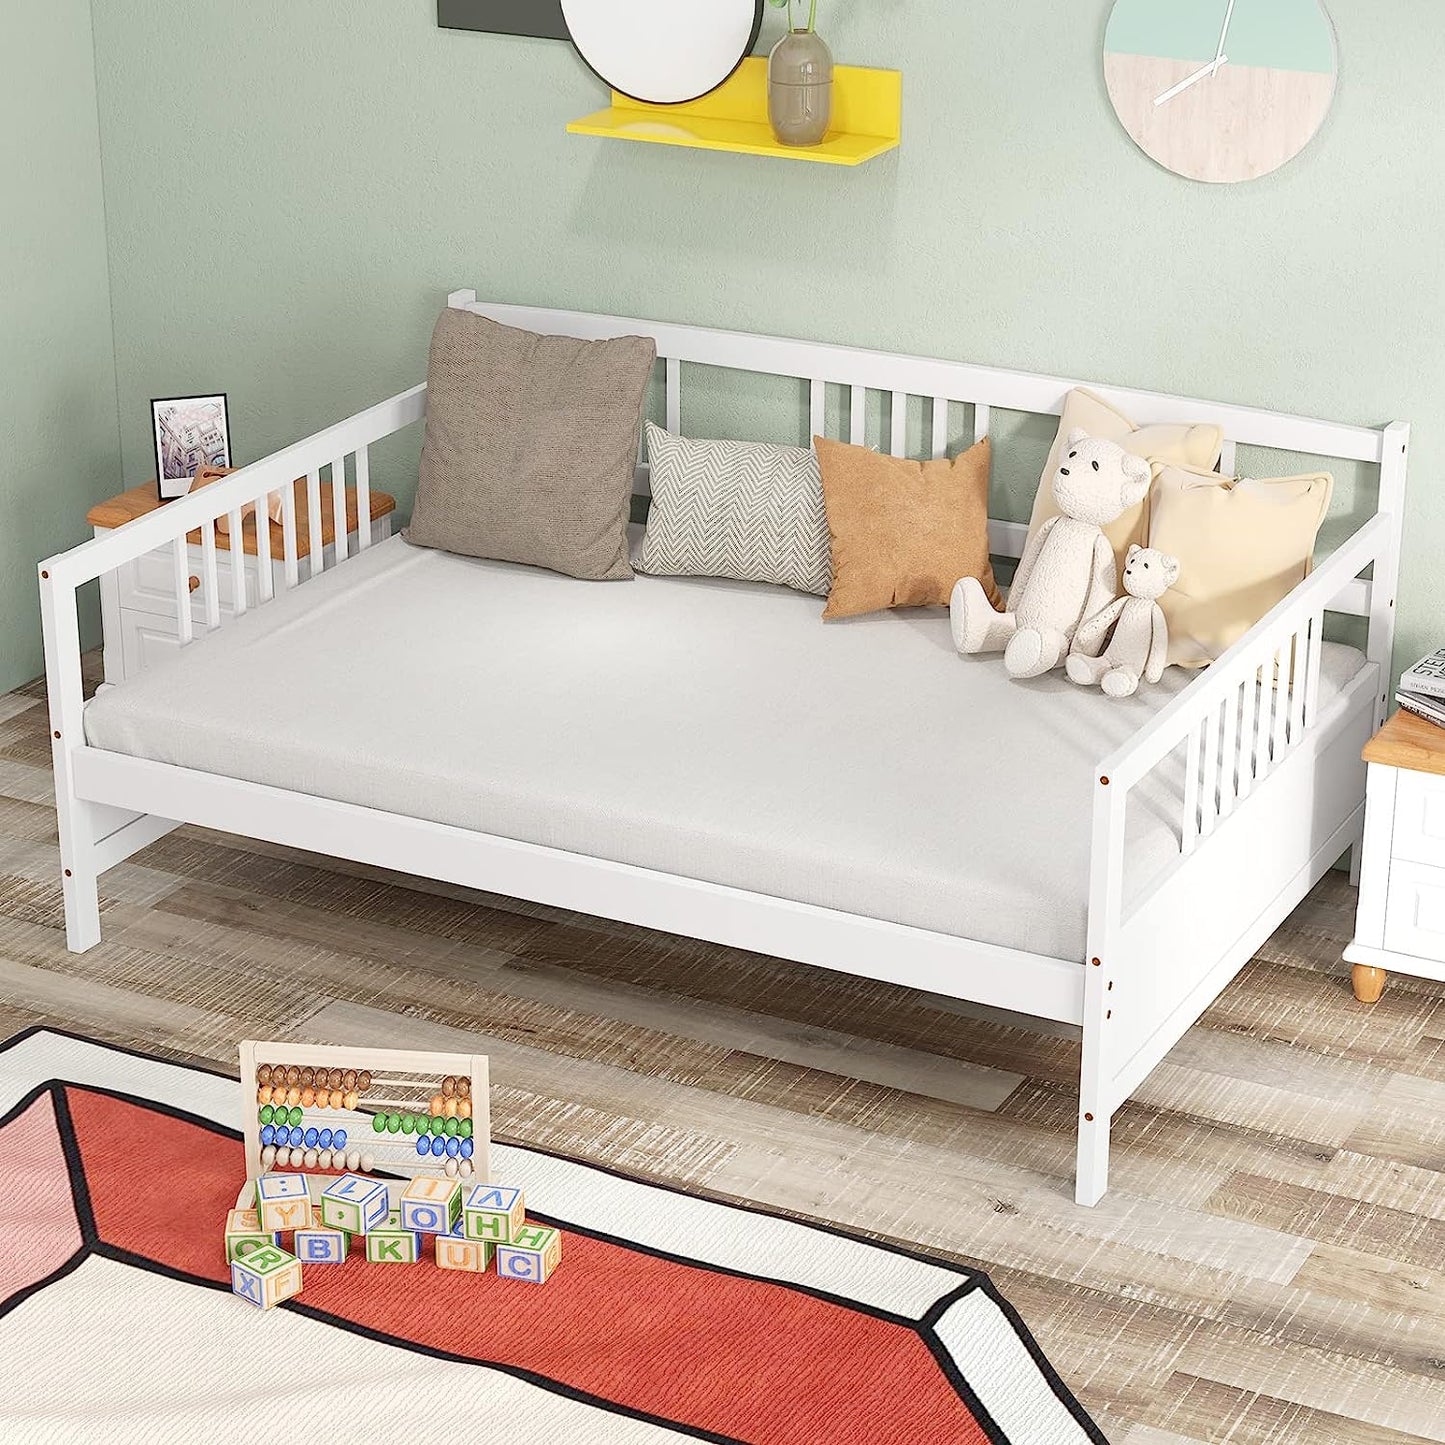 Twin Daybed Frame